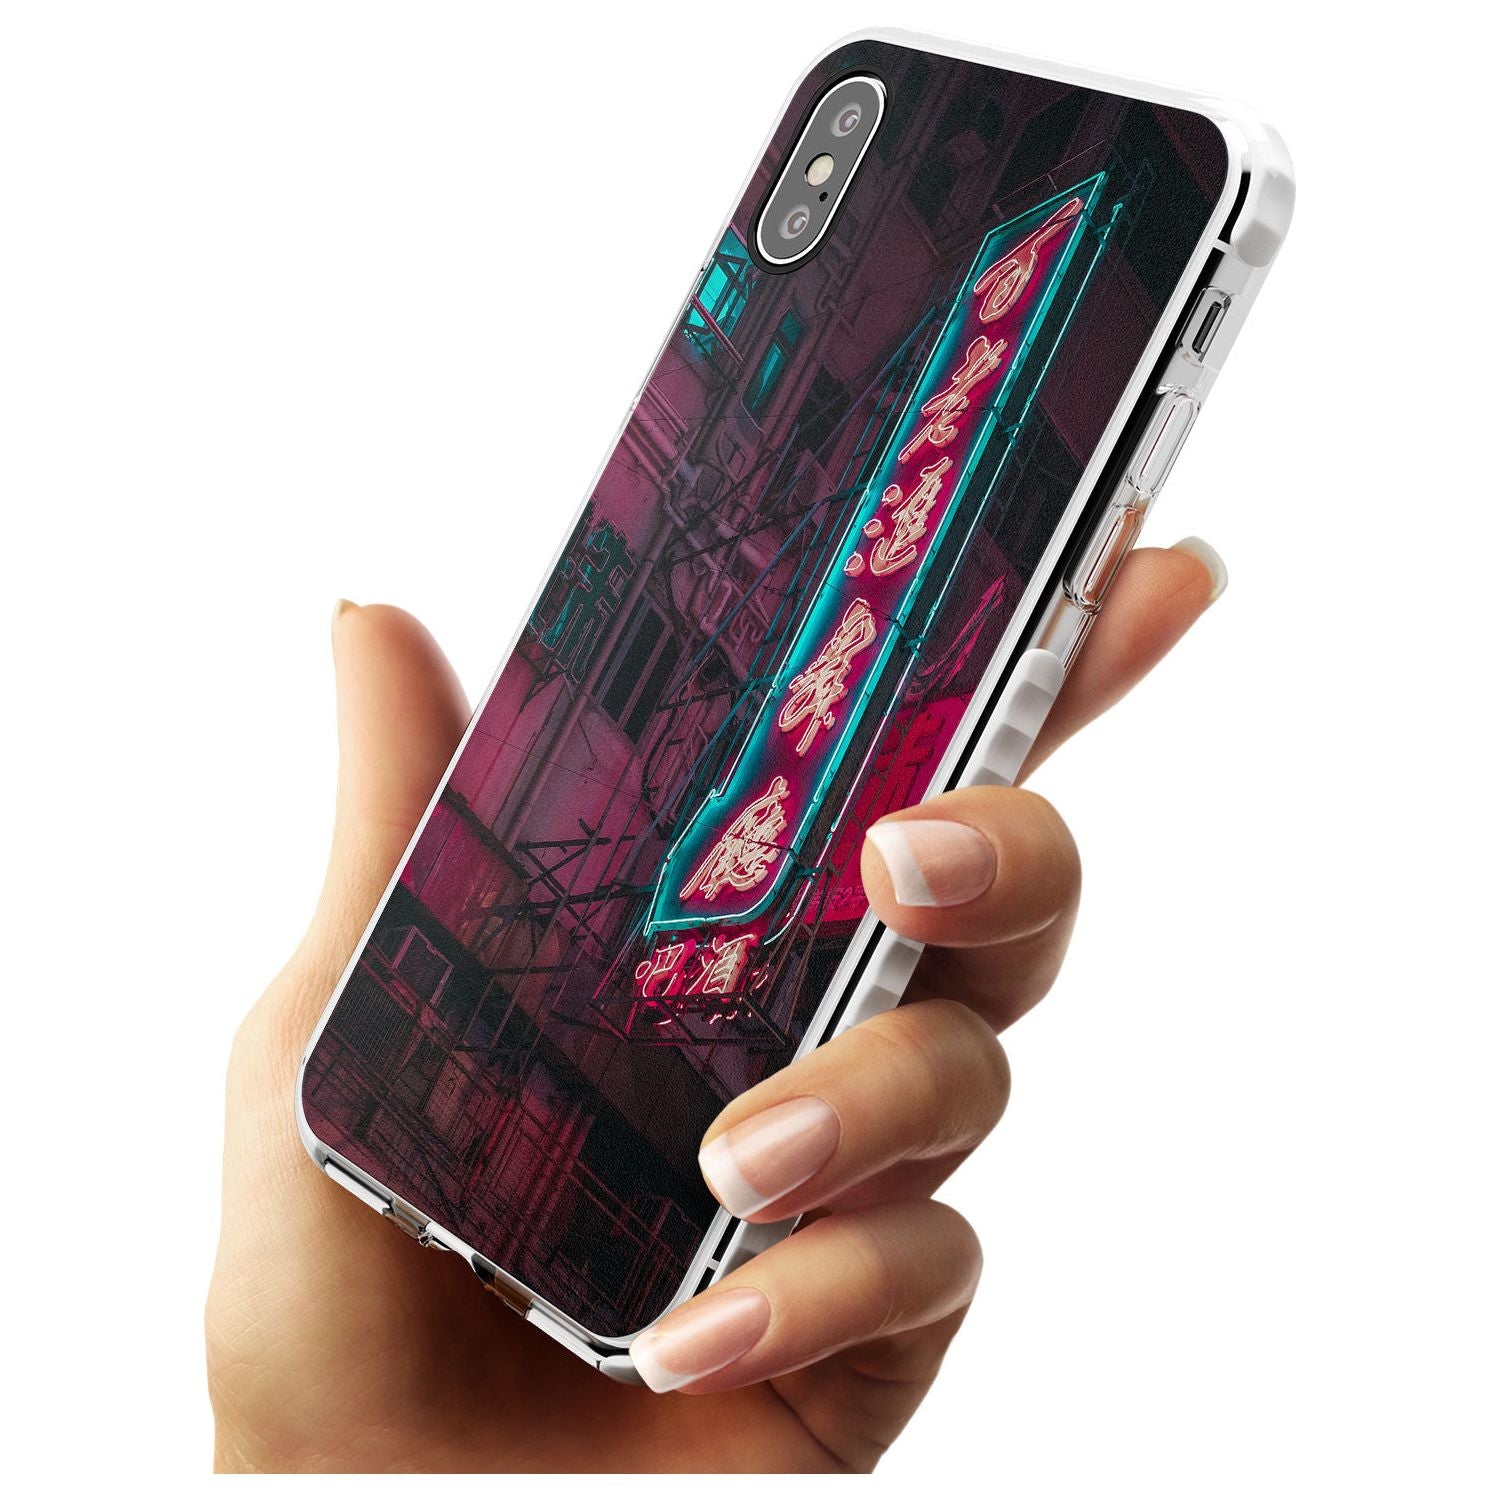 Large Kanji Sign - Neon Cities Photographs Impact Phone Case for iPhone X XS Max XR